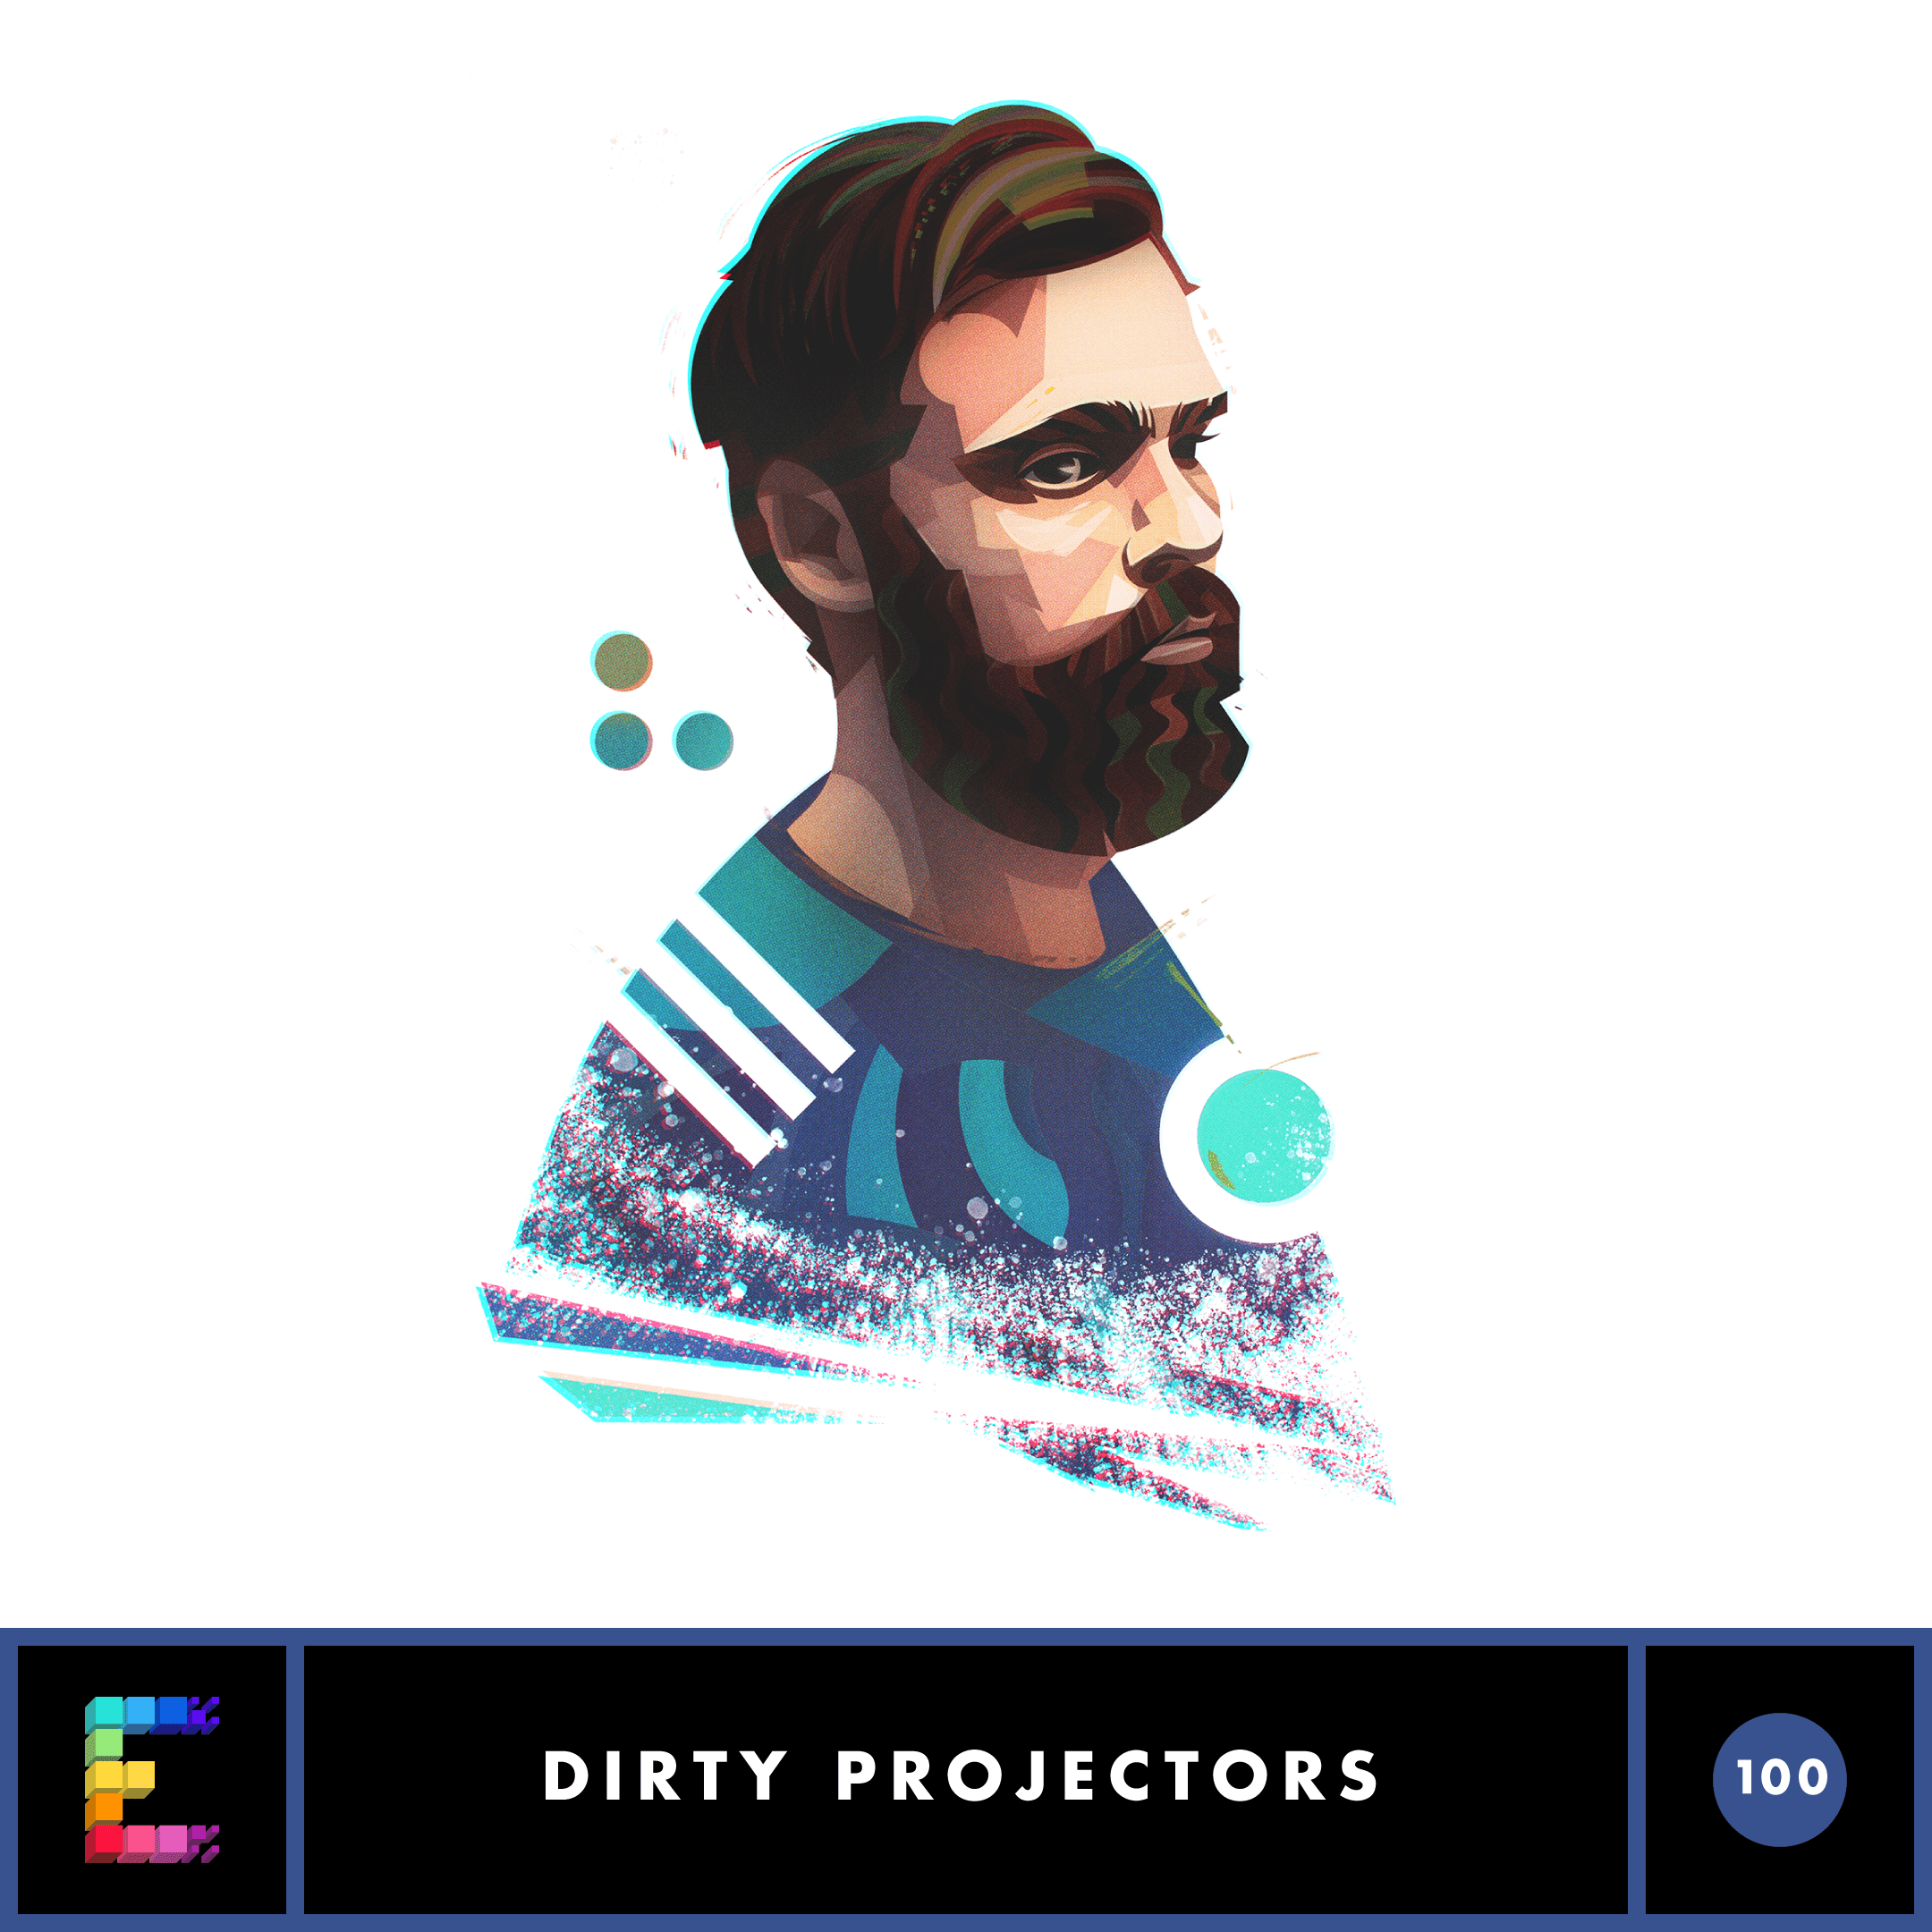 Thumbnail for "Dirty Projectors - Up in Hudson".